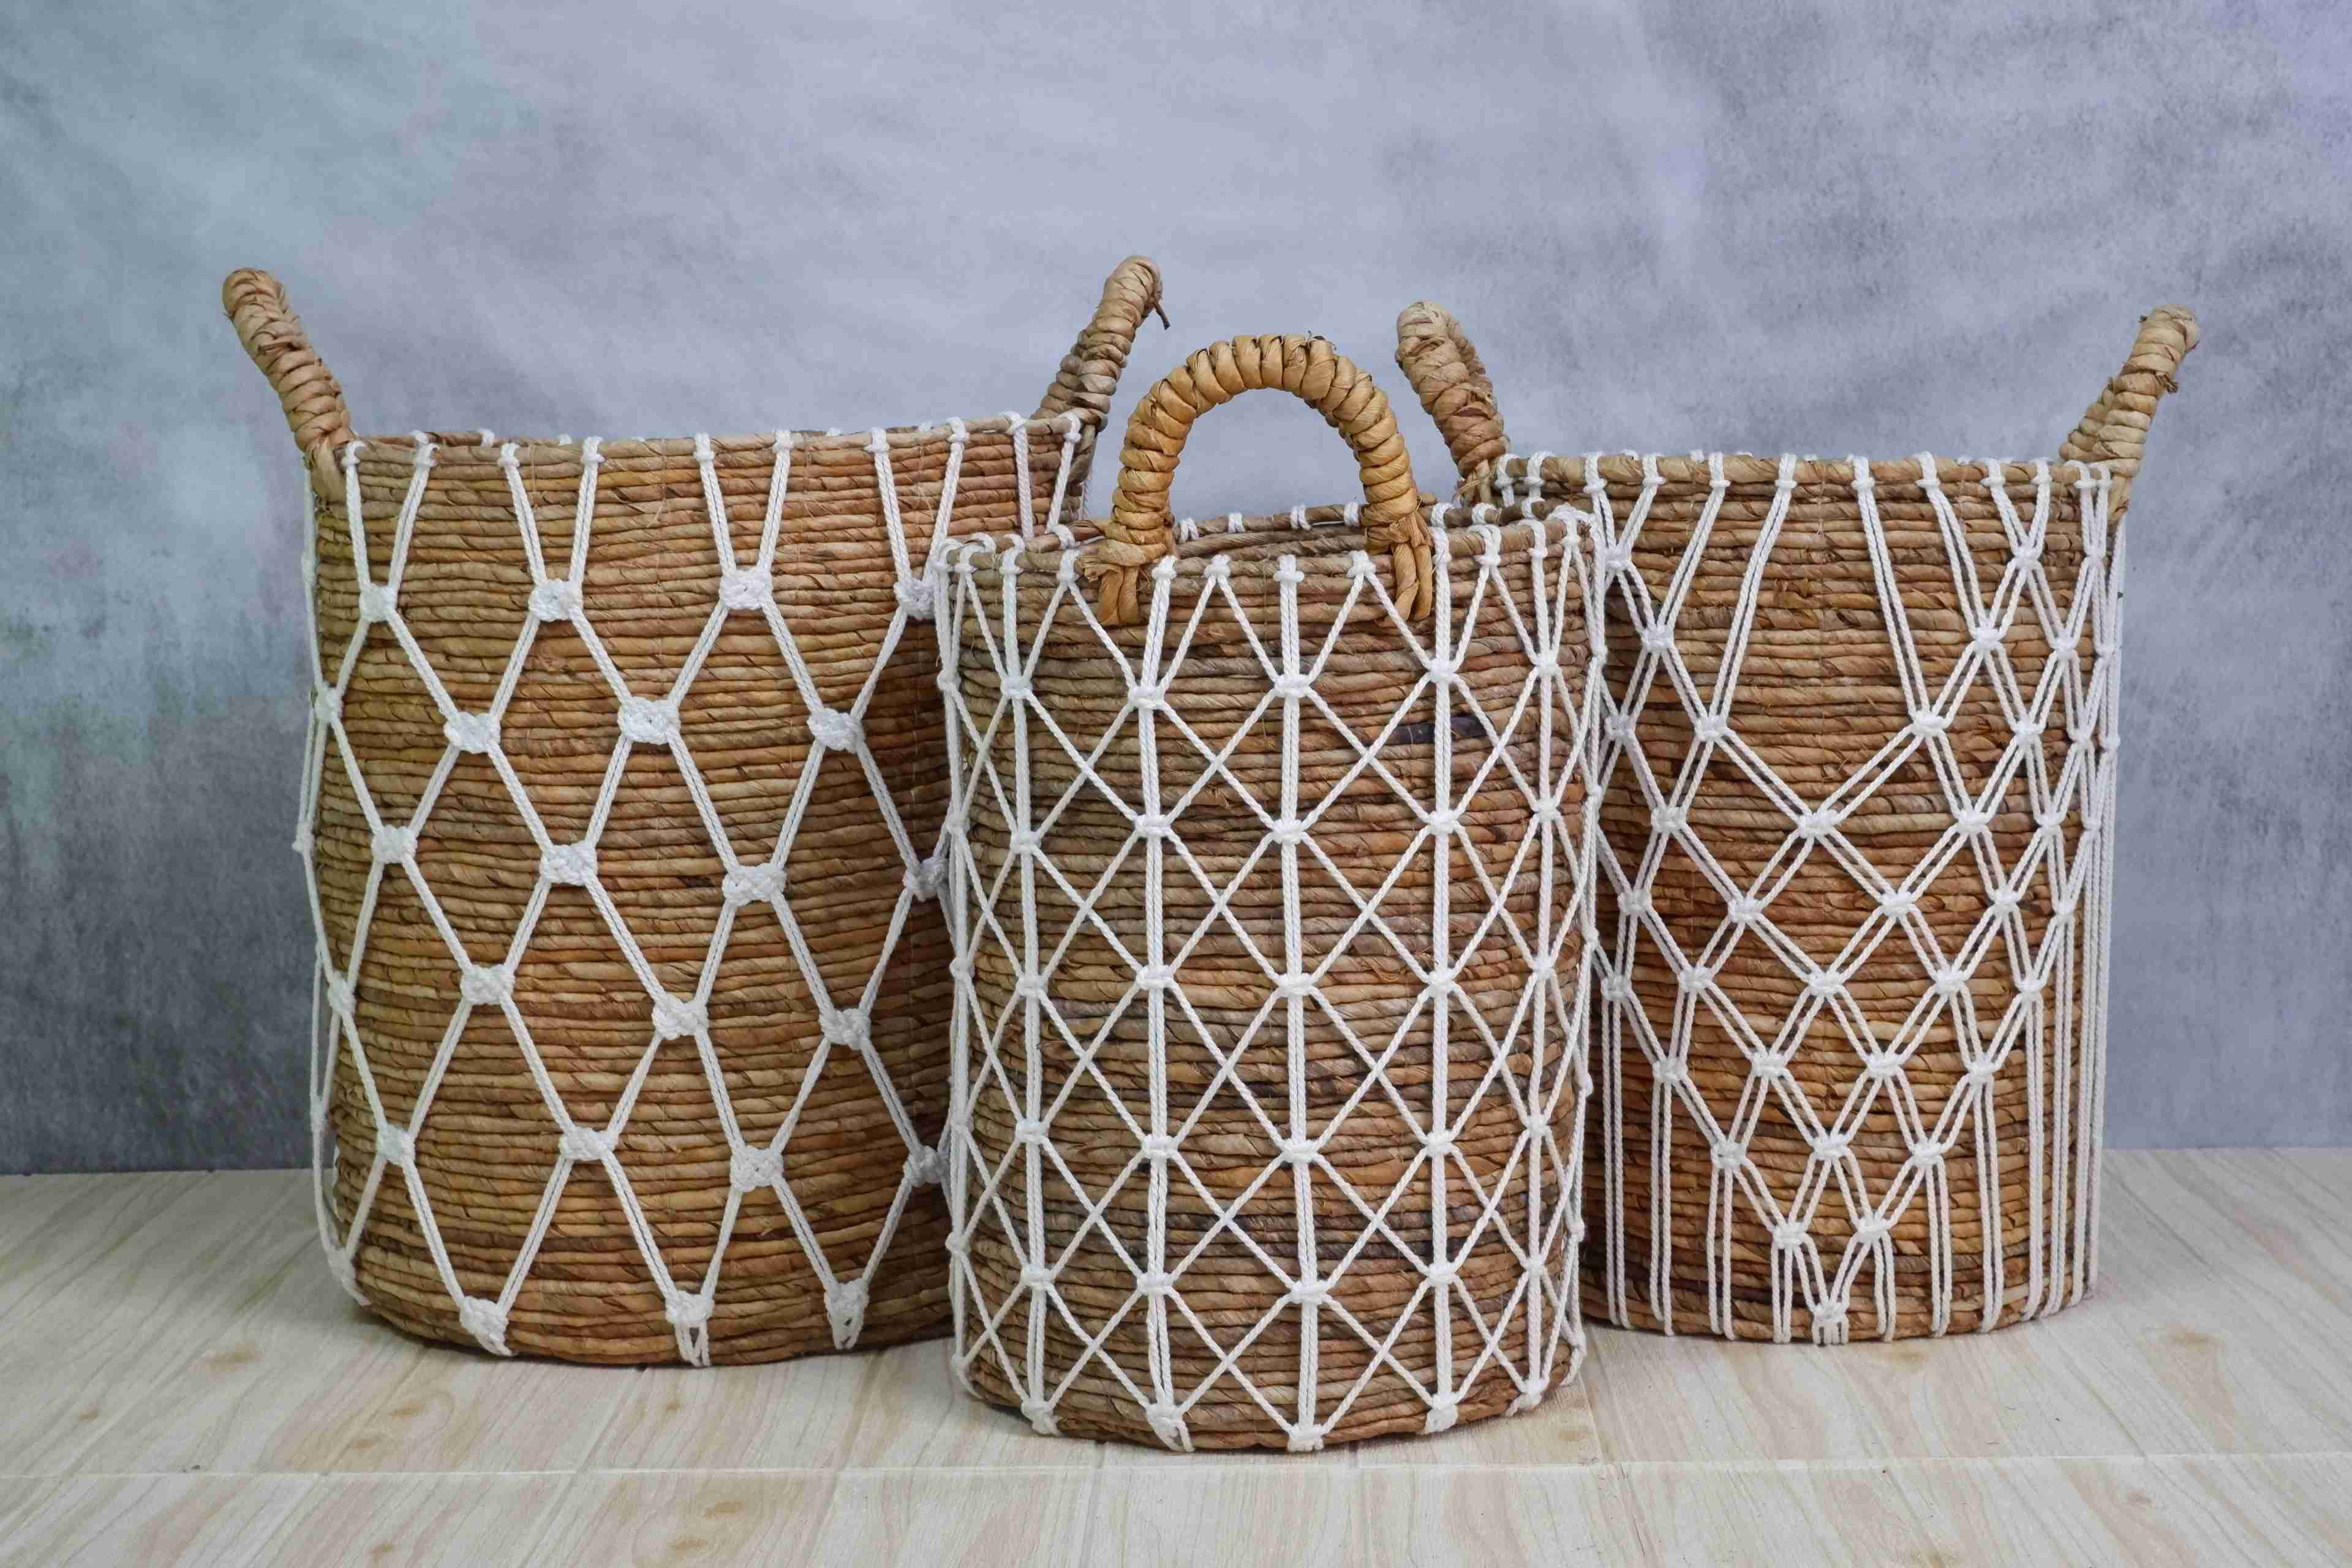 Tropical Knot baskets